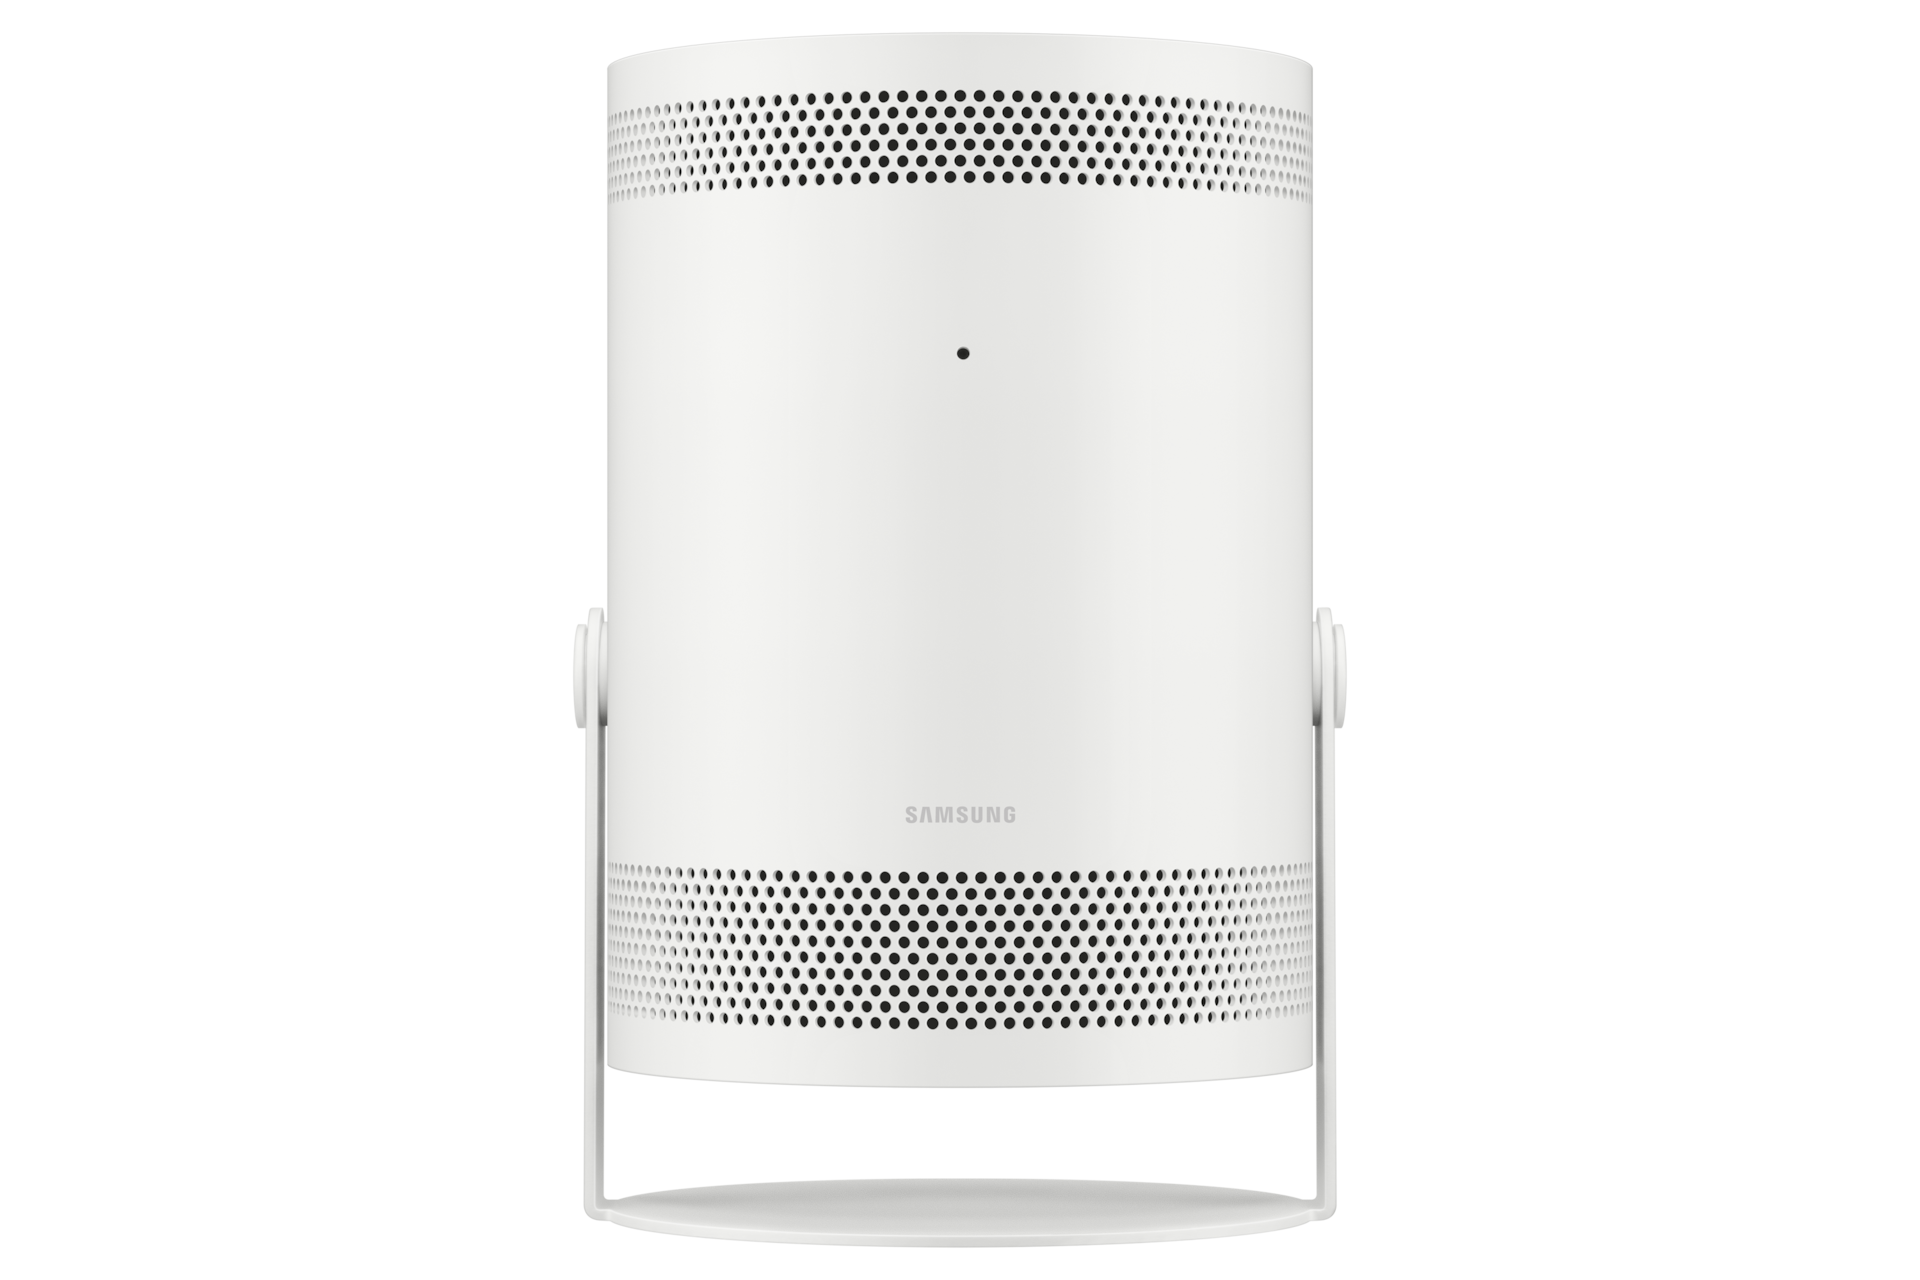 Samsung freestyle - front White